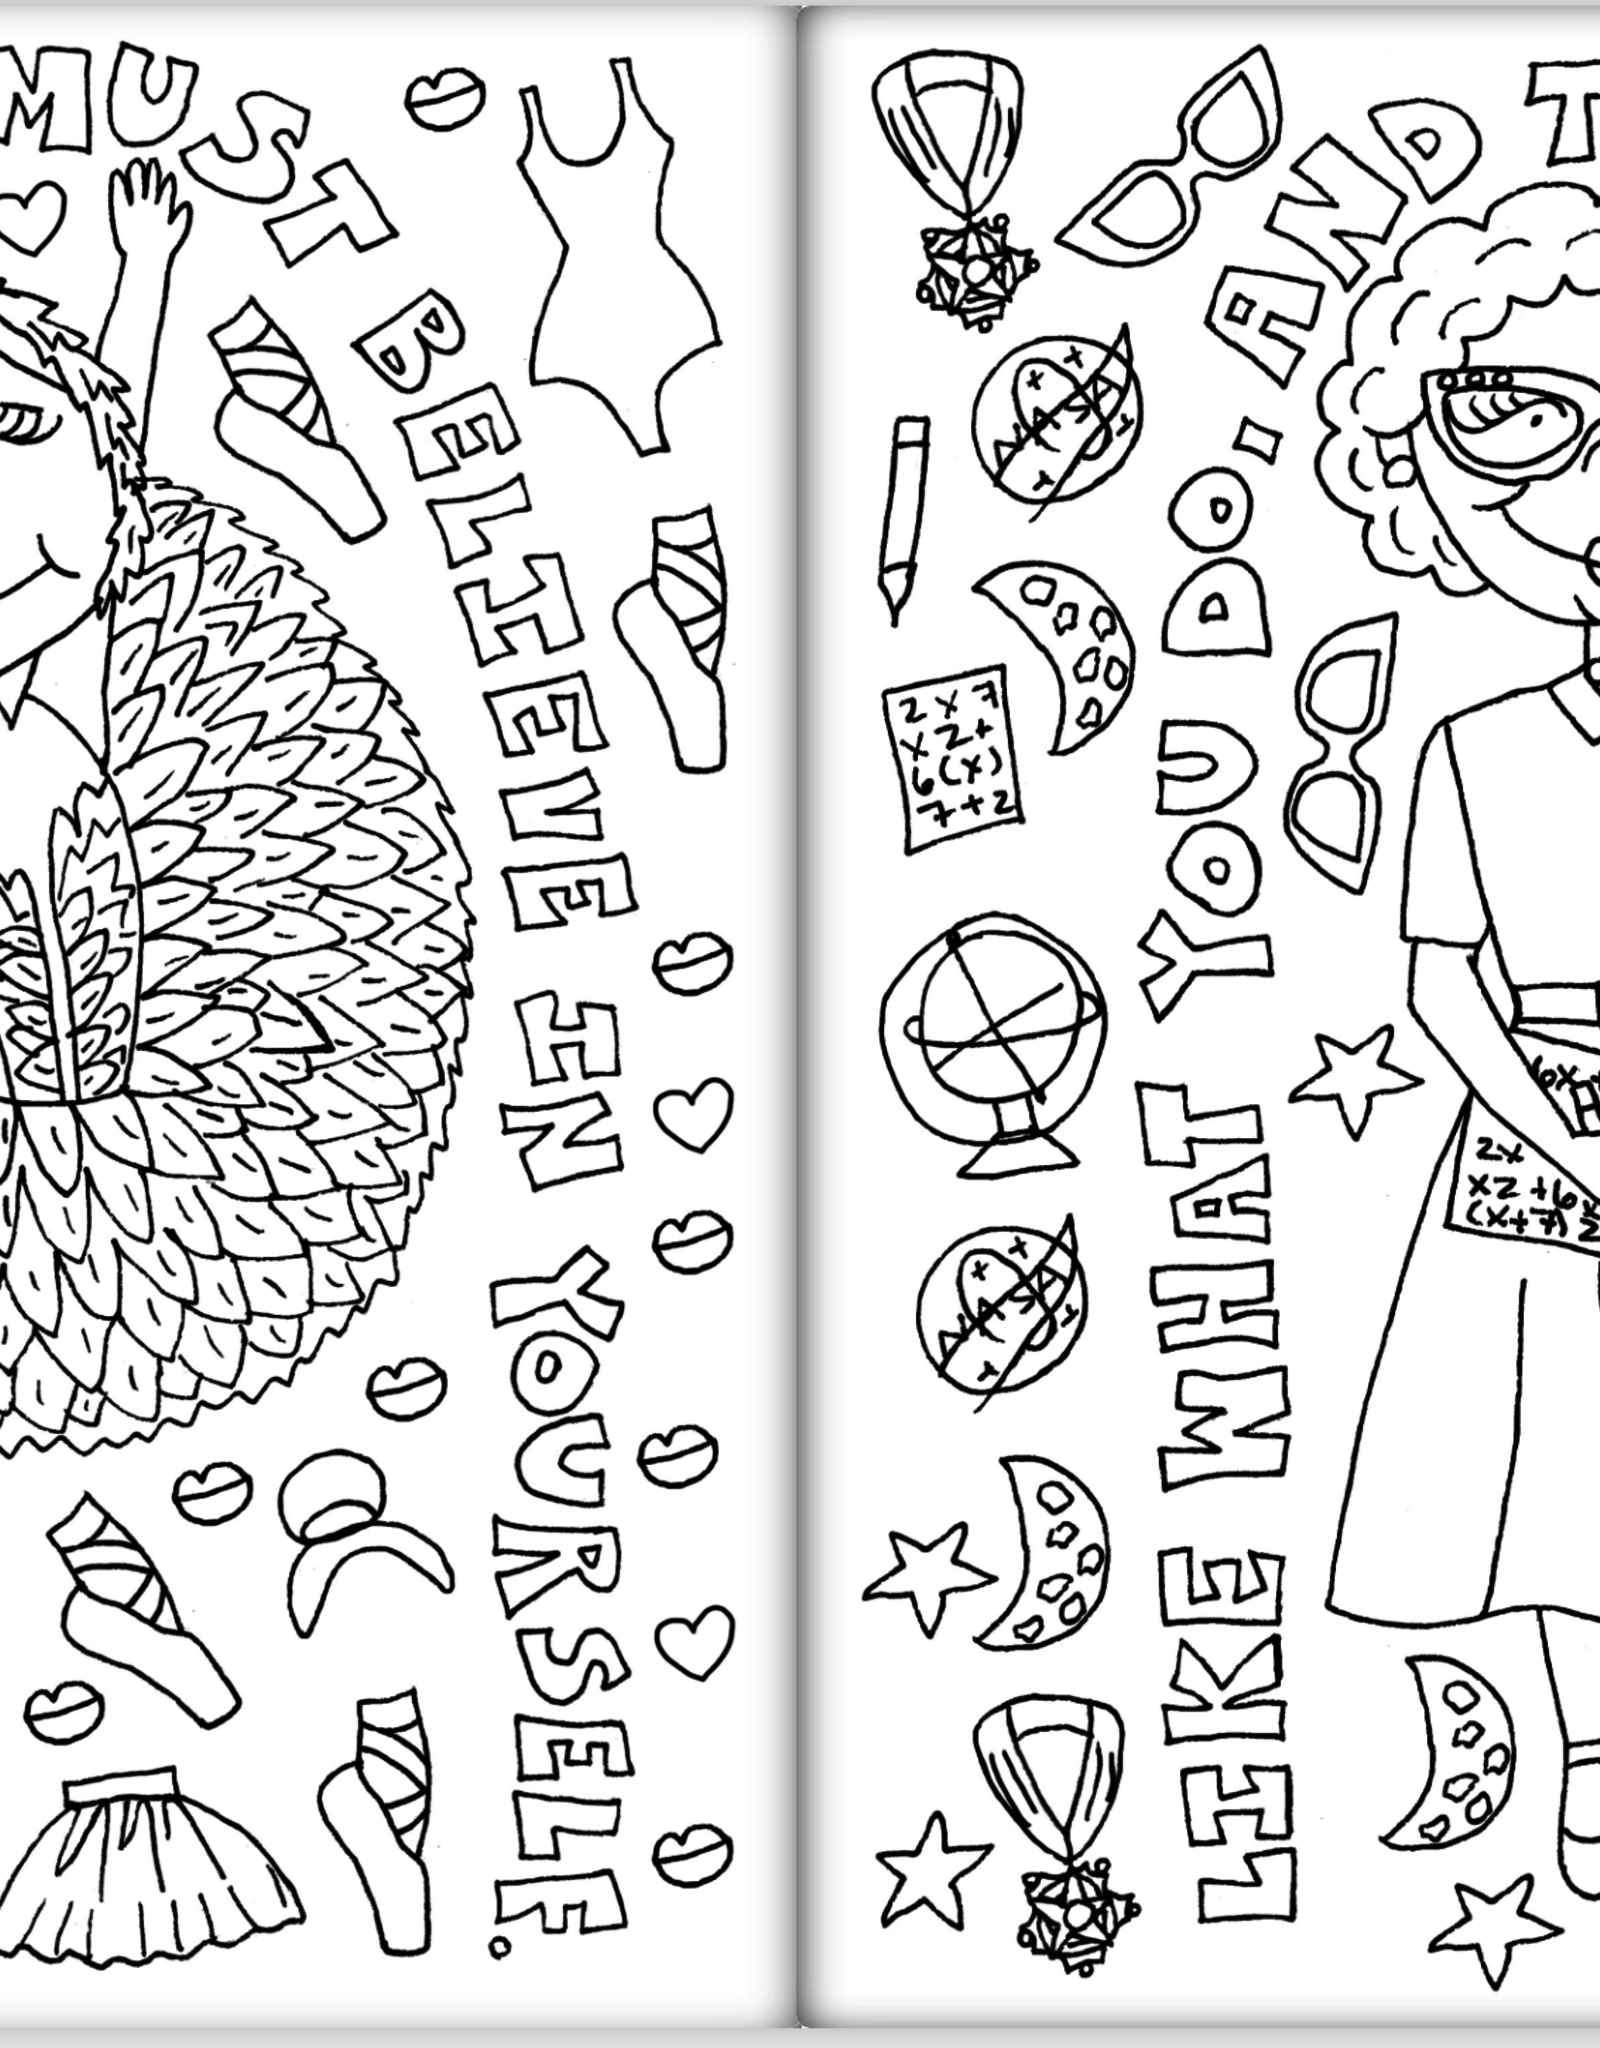 Little Black History Icons Coloring Book – Kahri by KahriAnne Kerr